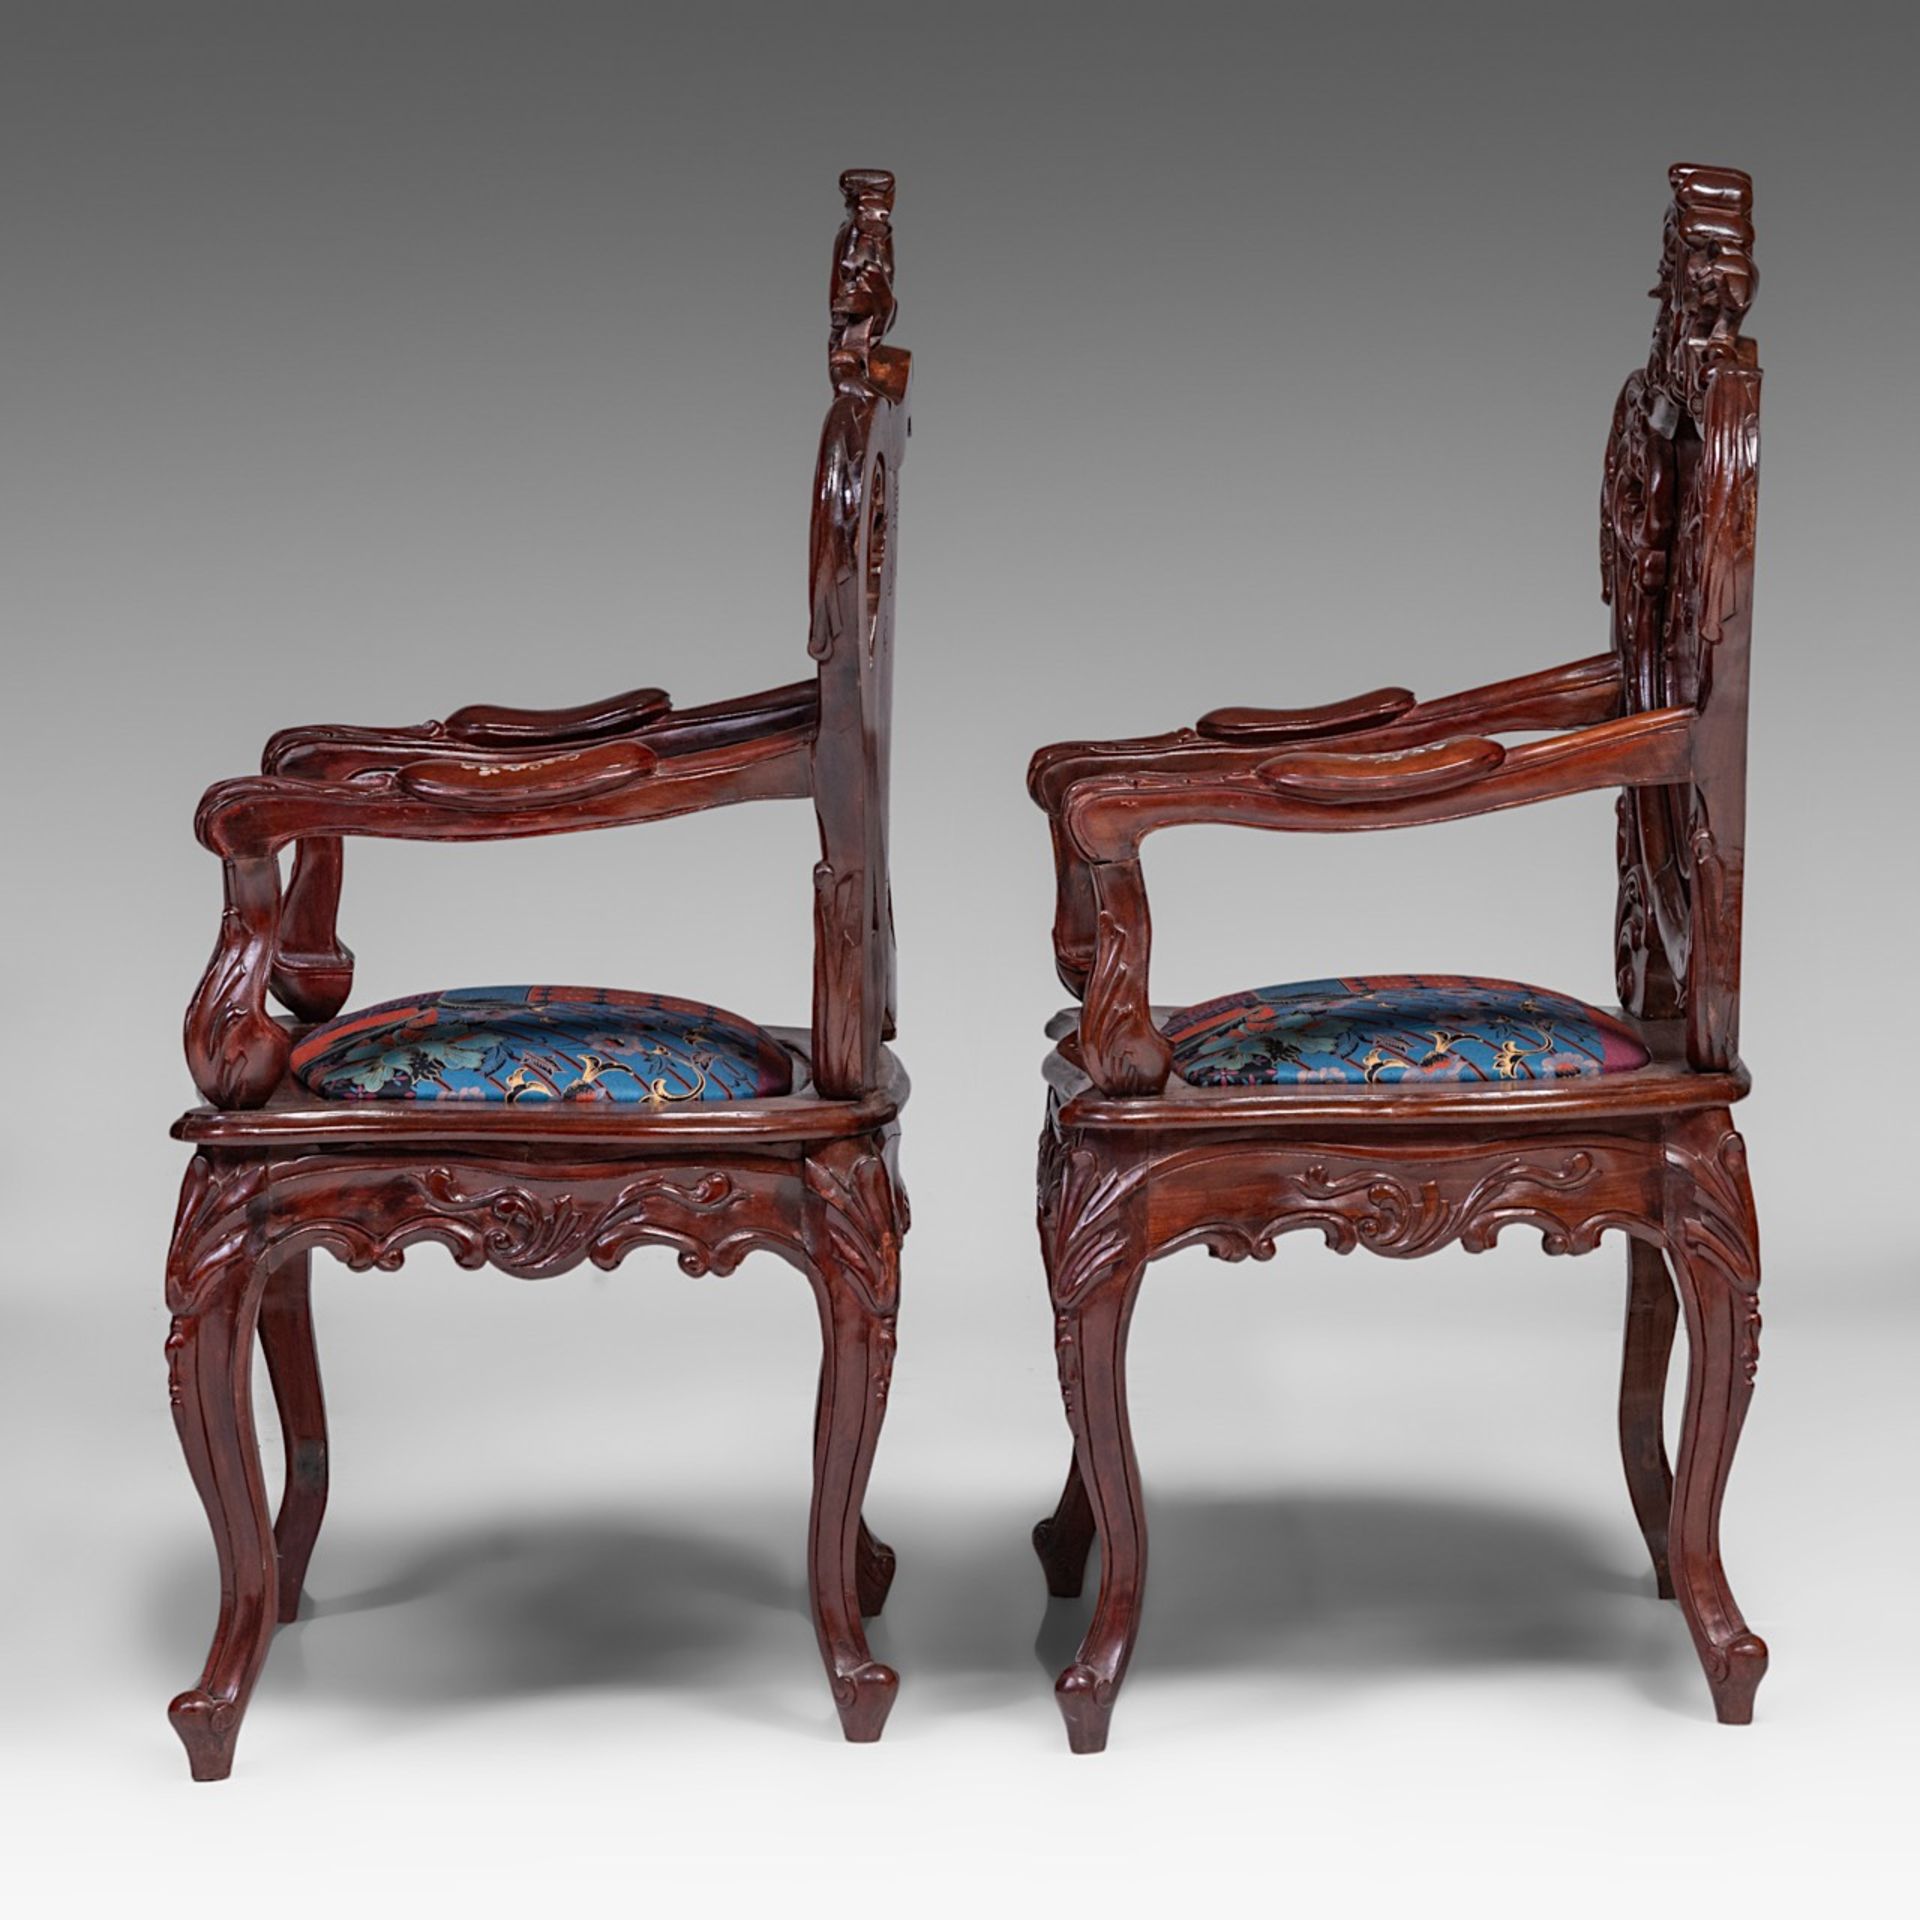 An Anglo-Chinese settee and two chairs, H settee 132 - H chair 108 cm - Image 20 of 24